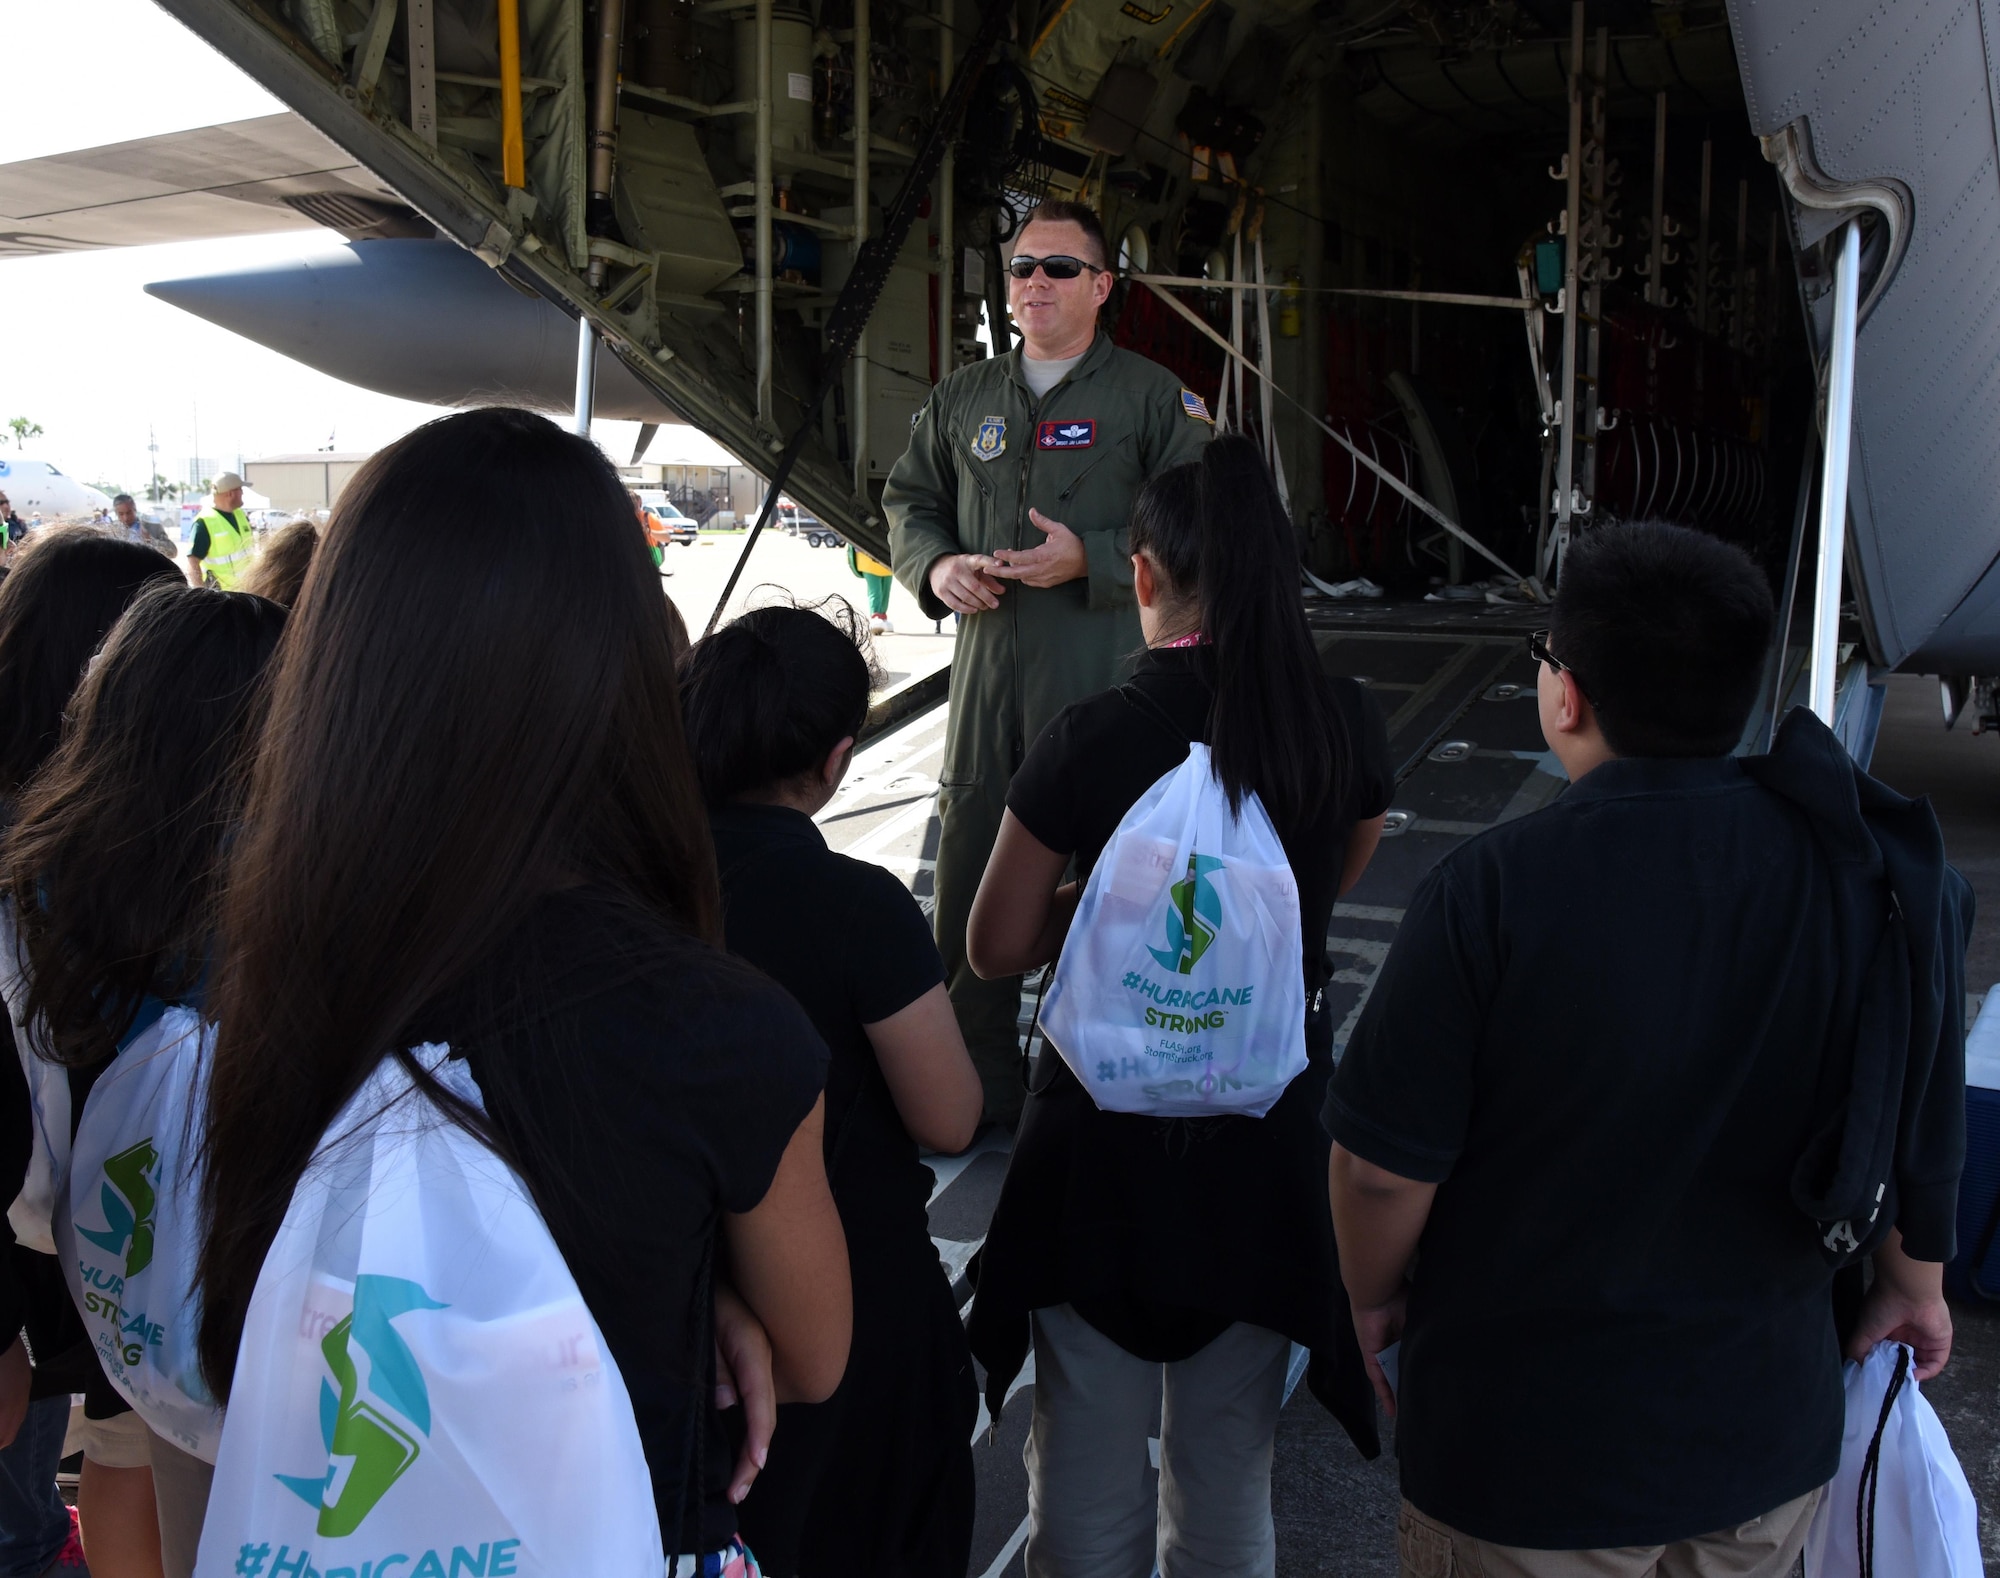 Senior Master Sgt. Jay Latham, 53rd Weather Reconnaissance Squadron dropsonde operator, briefs students during the Gulf Coast Hurricane Awareness Tour May 16-20, 2016. The Air Force Reserve Hurricane Hunter aircrew with their WC-130J Super Hercules, based out of Keesler Air Force Base, Mississippi, and a team of National Oceanic and Atmospheric Administration hurricane experts visited five Gulf Coast cities as part of this year’s tour. (U.S. Air Force photo/Maj. Marnee A.C. Losurdo)